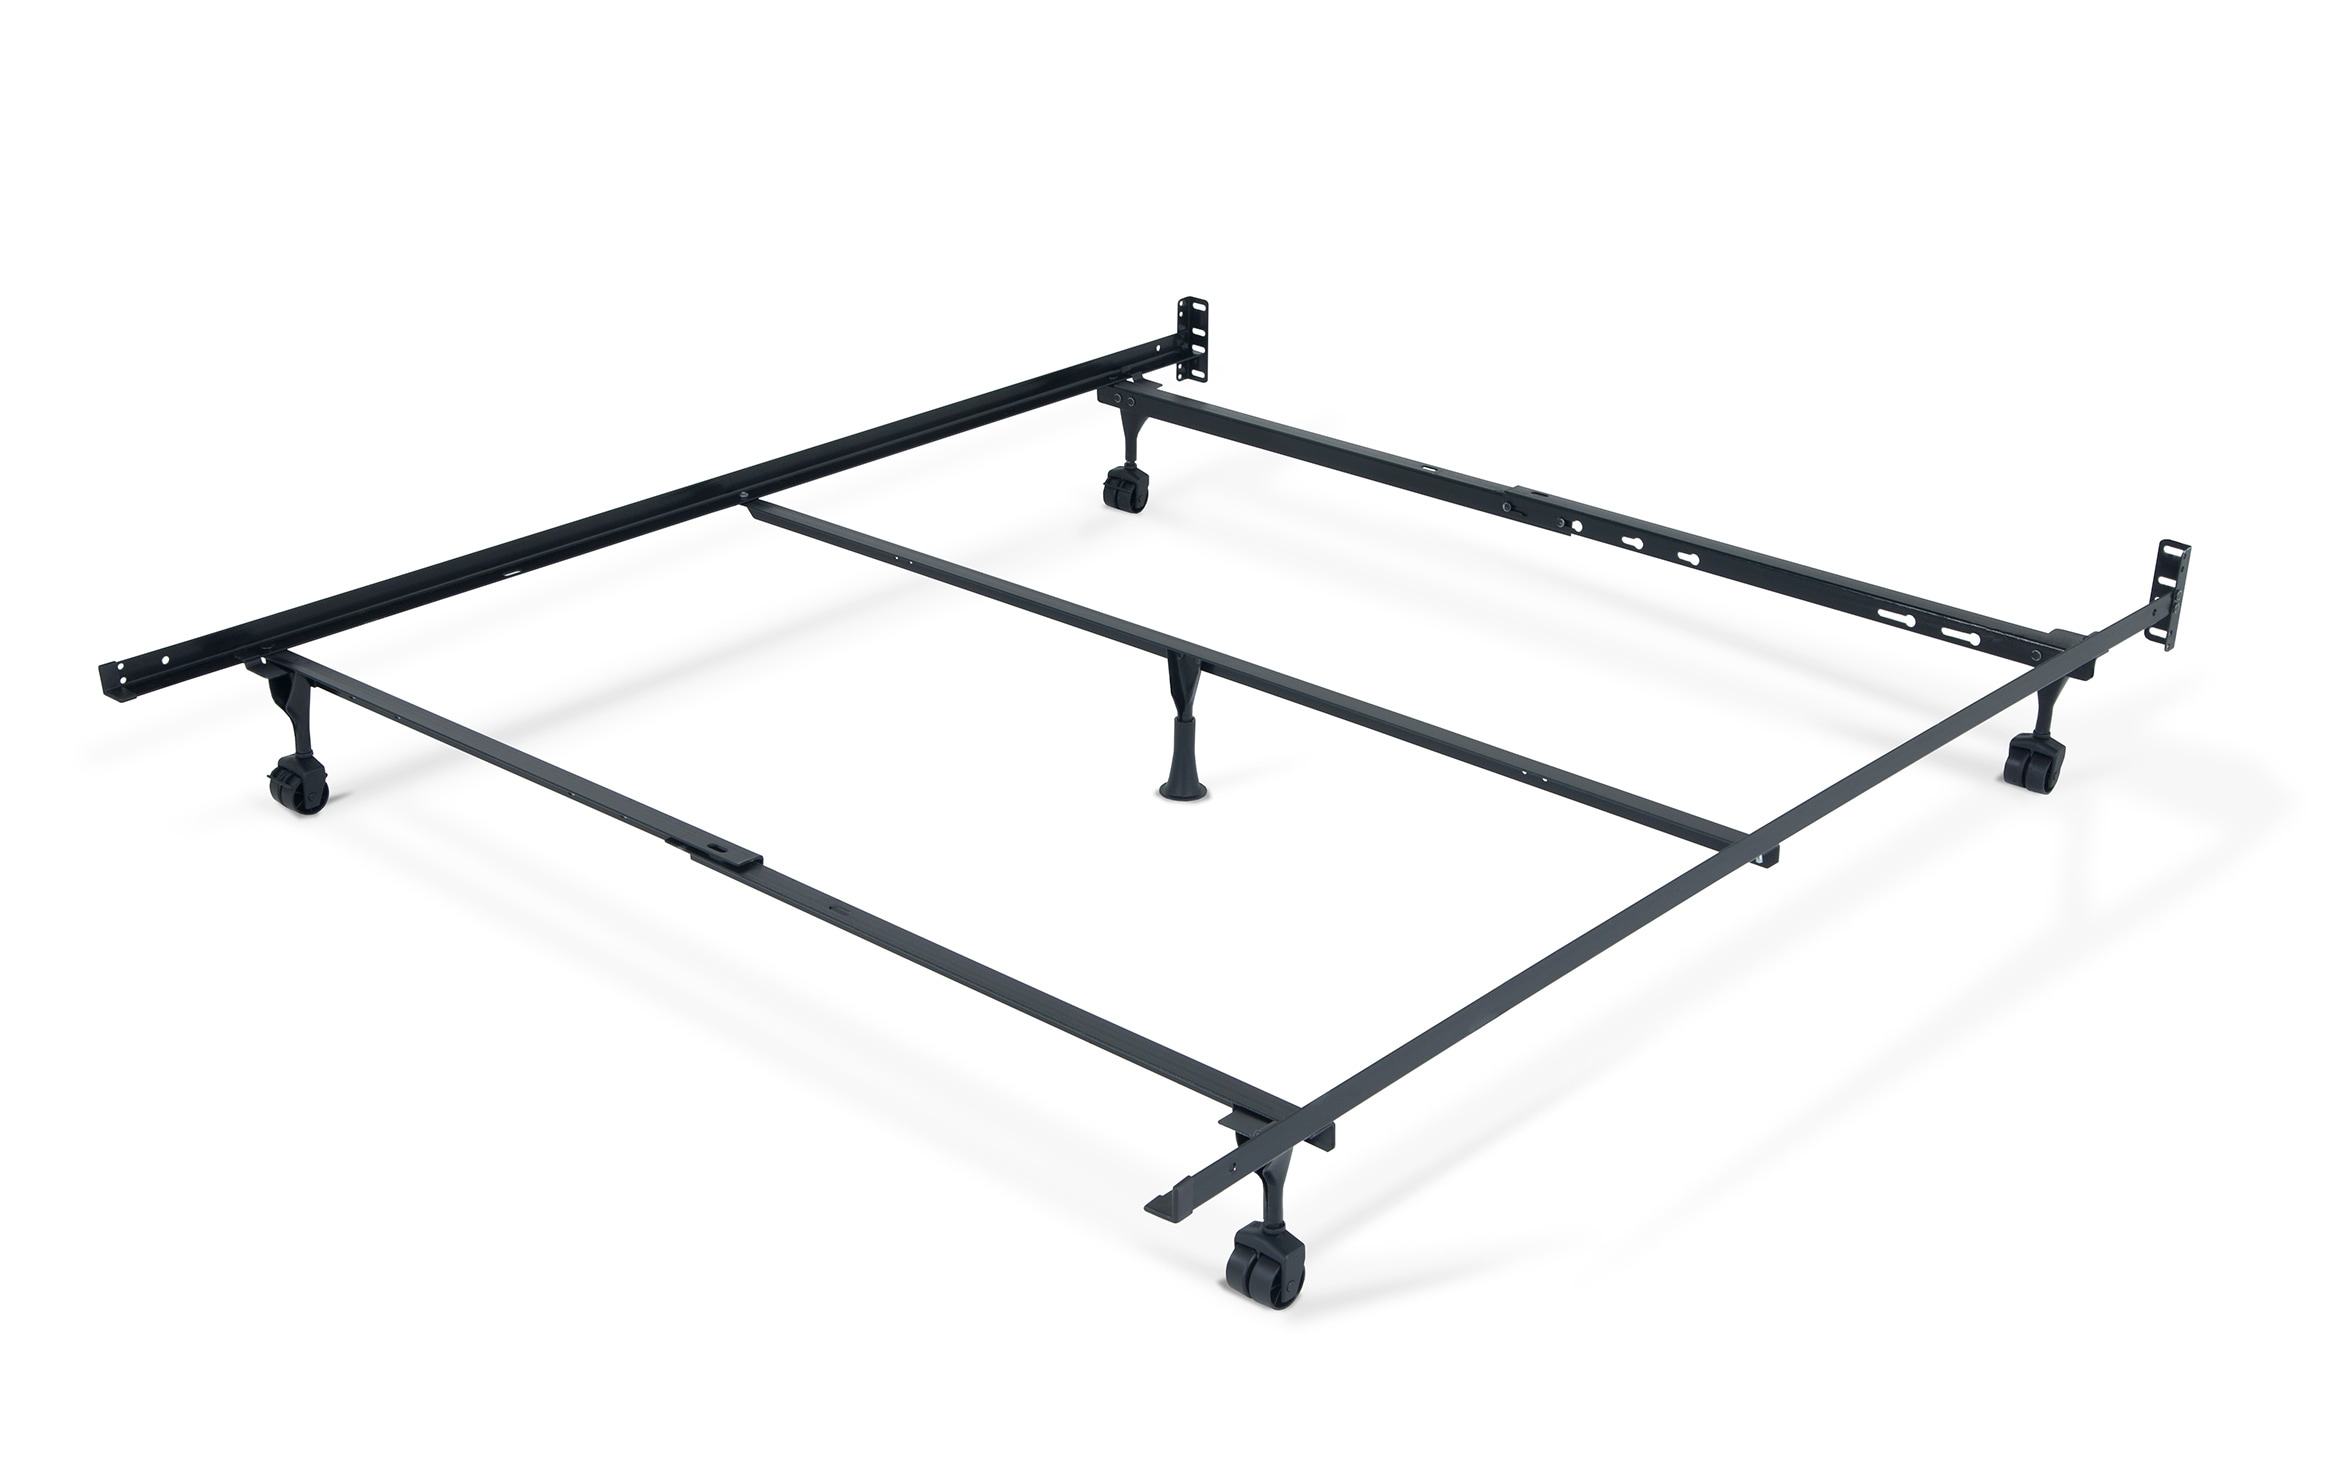 Queen King California Bed Frame, Cal King Iron Bed Frame